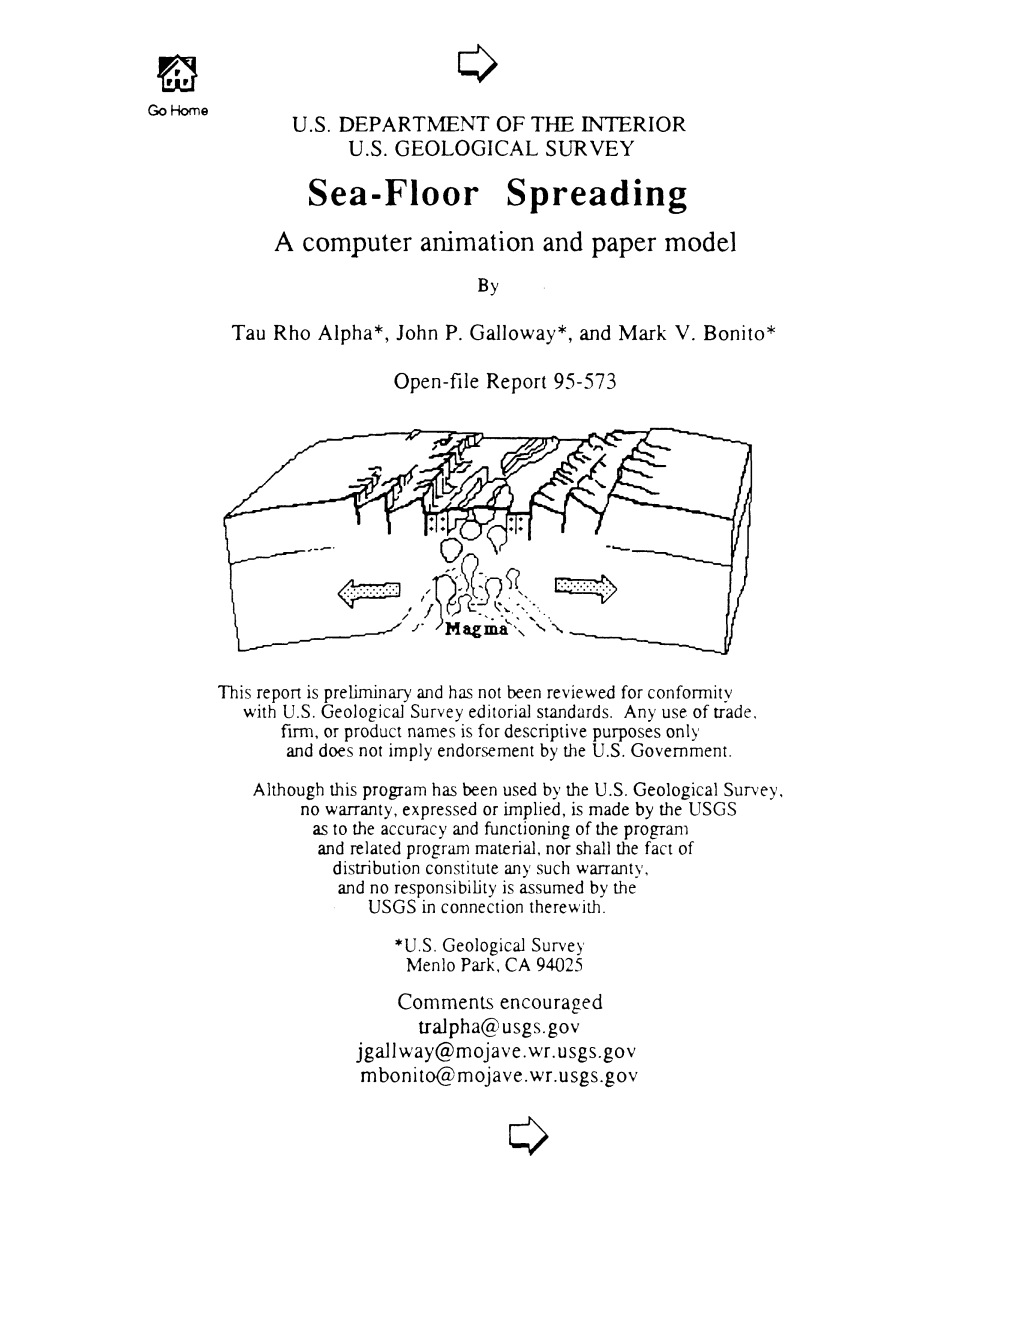 Sea-Floor Spreading a Computer Animation and Paper Model By